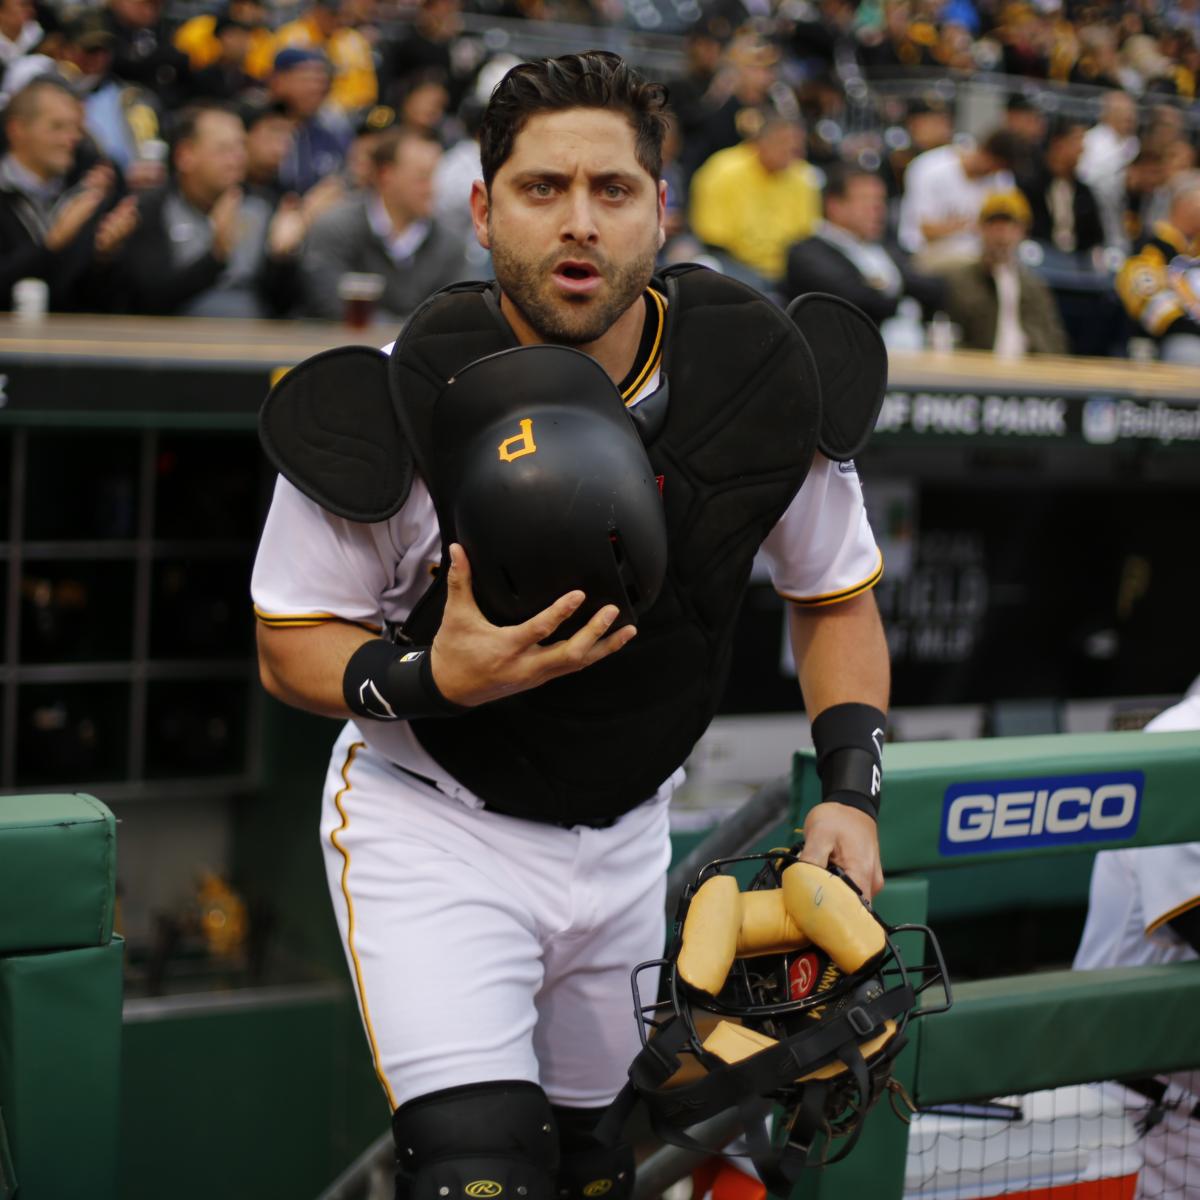 Francisco Cervelli talks about his PED use and Biogenesis - NBC Sports